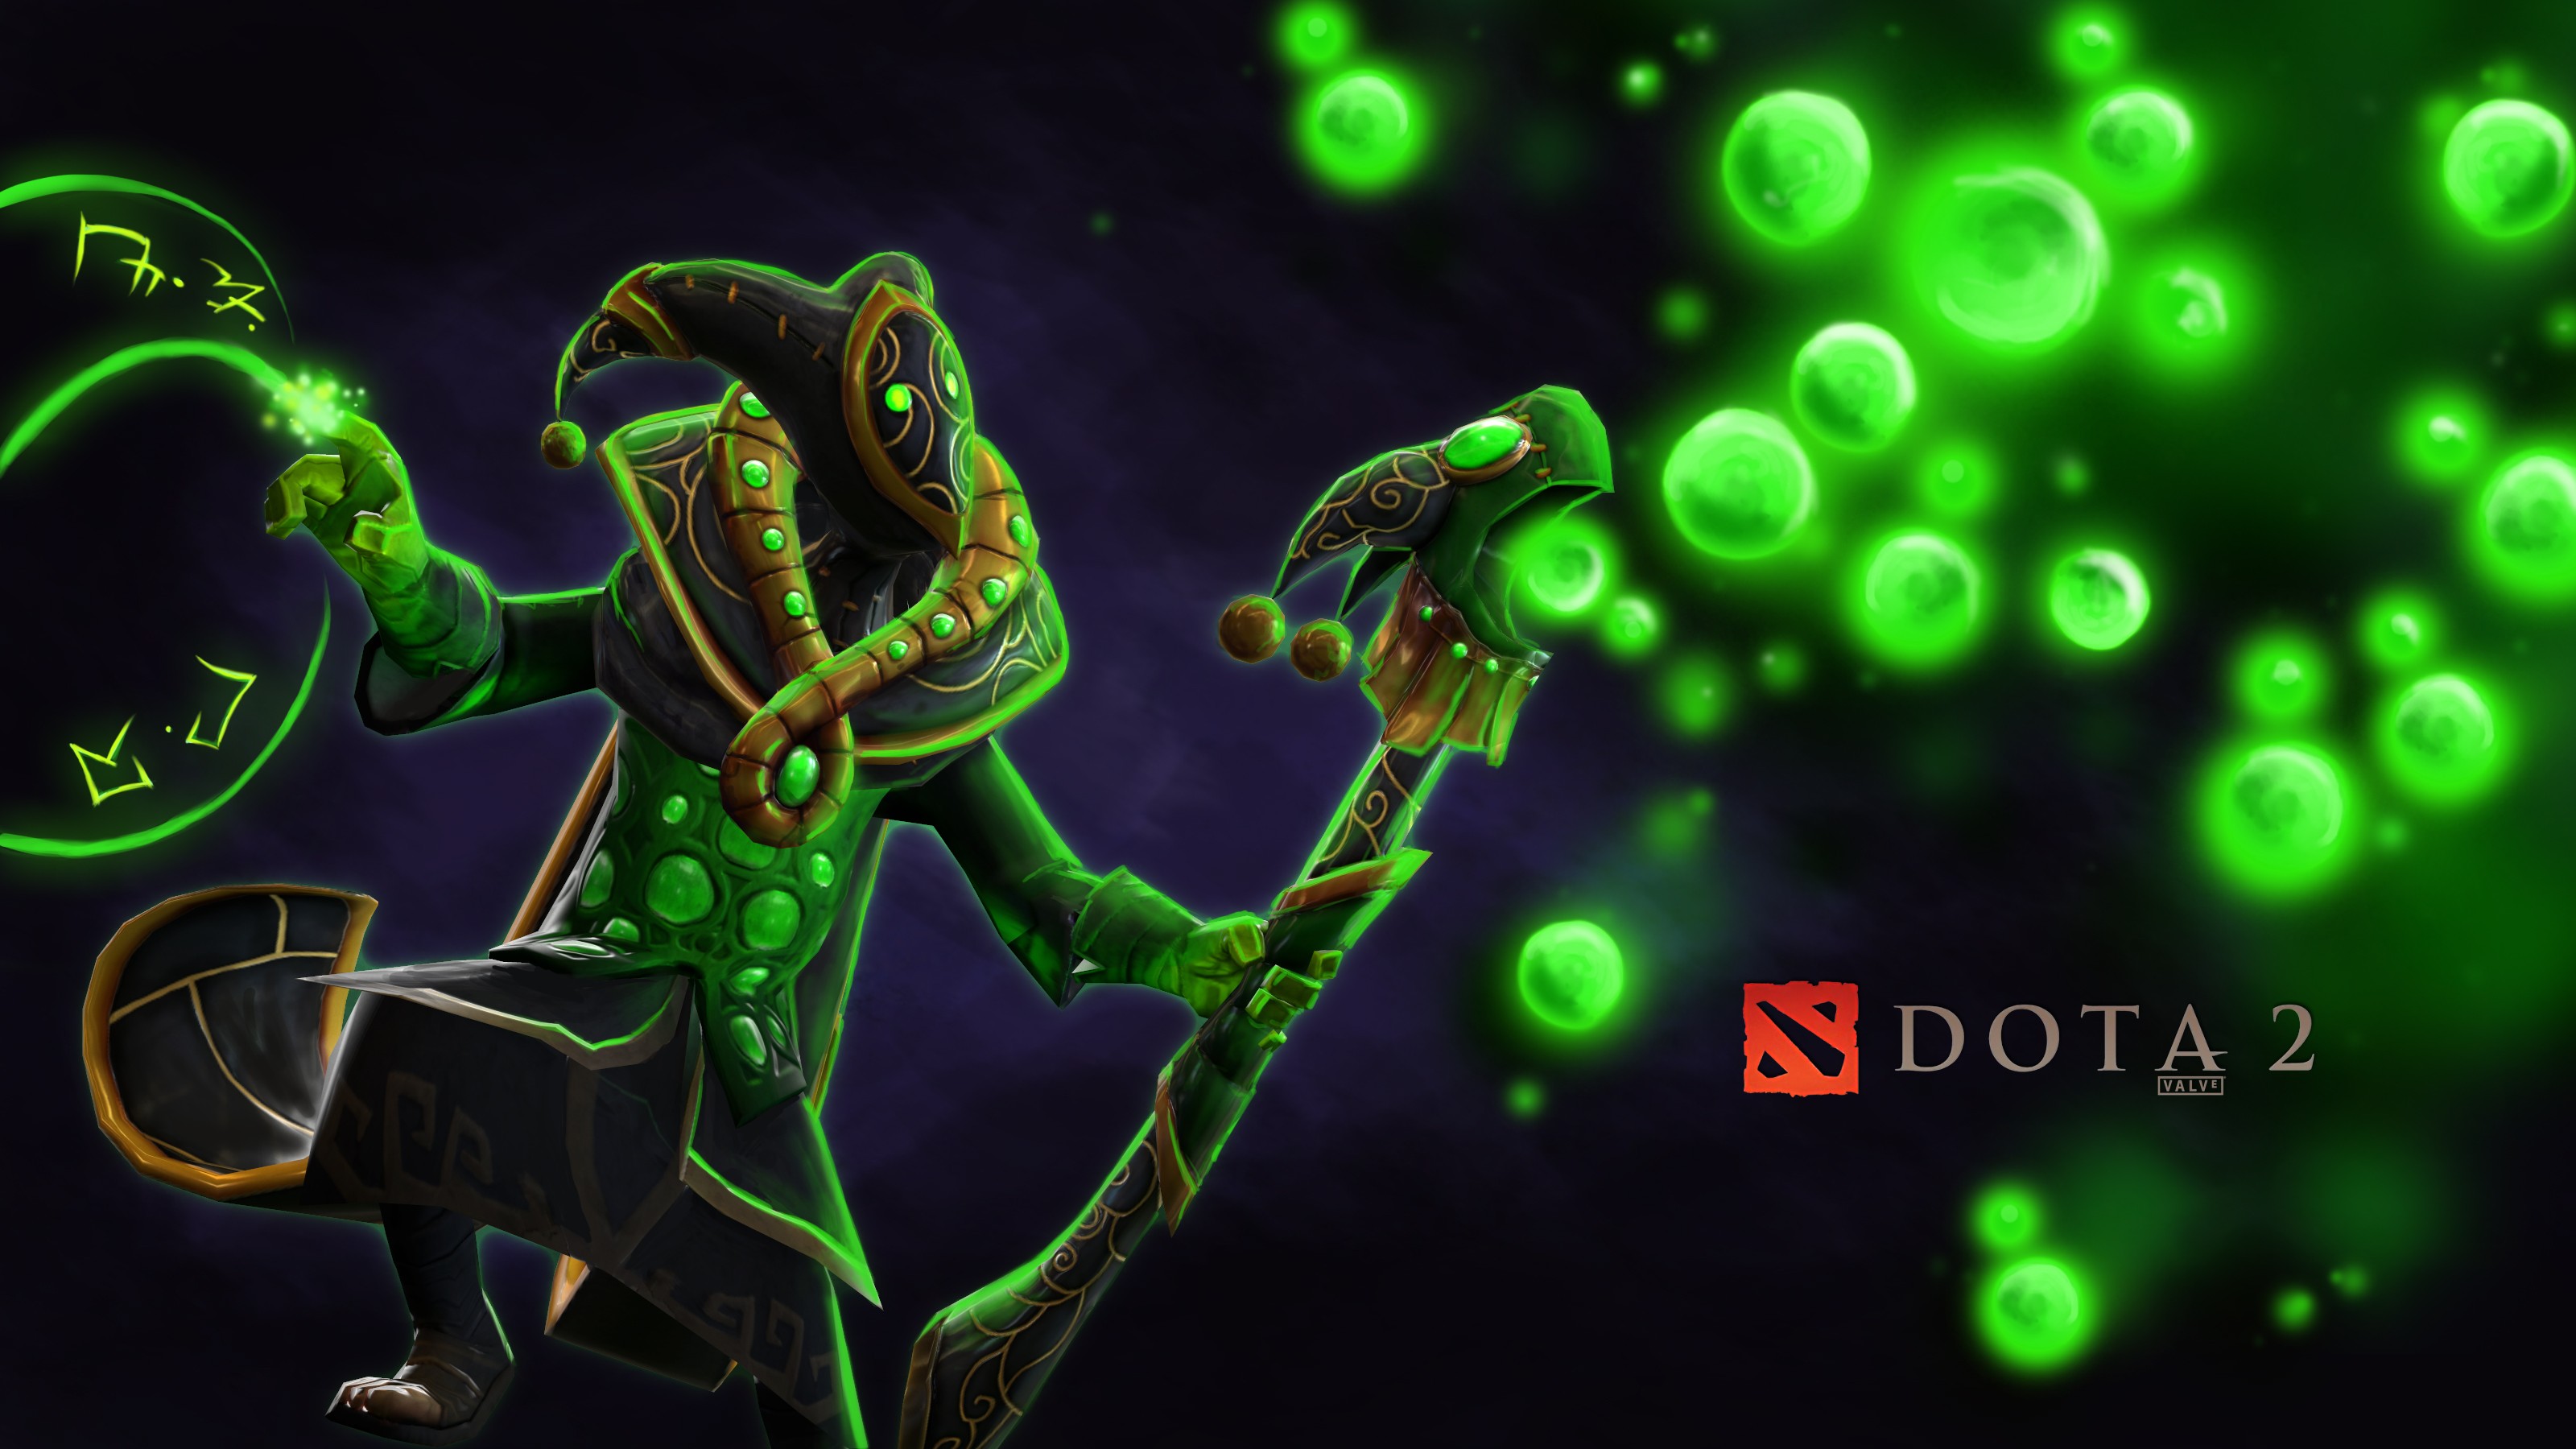 General 3200x1800 Dota 2 rubick video games abstract PC gaming